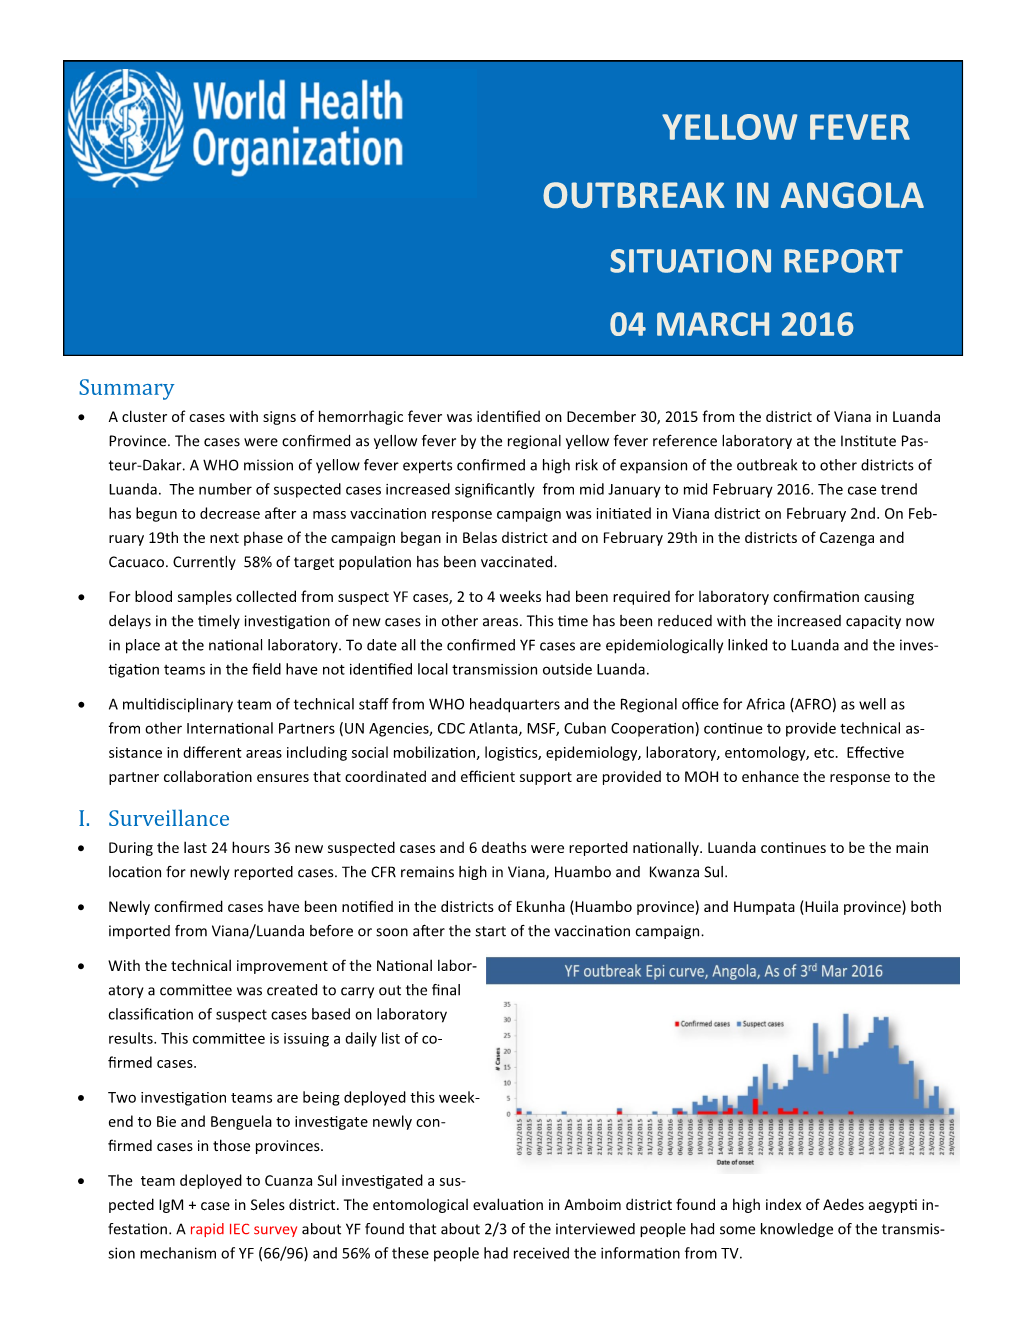 Yellow Fever Outbreak in Angola Situation Report 04 March 2016